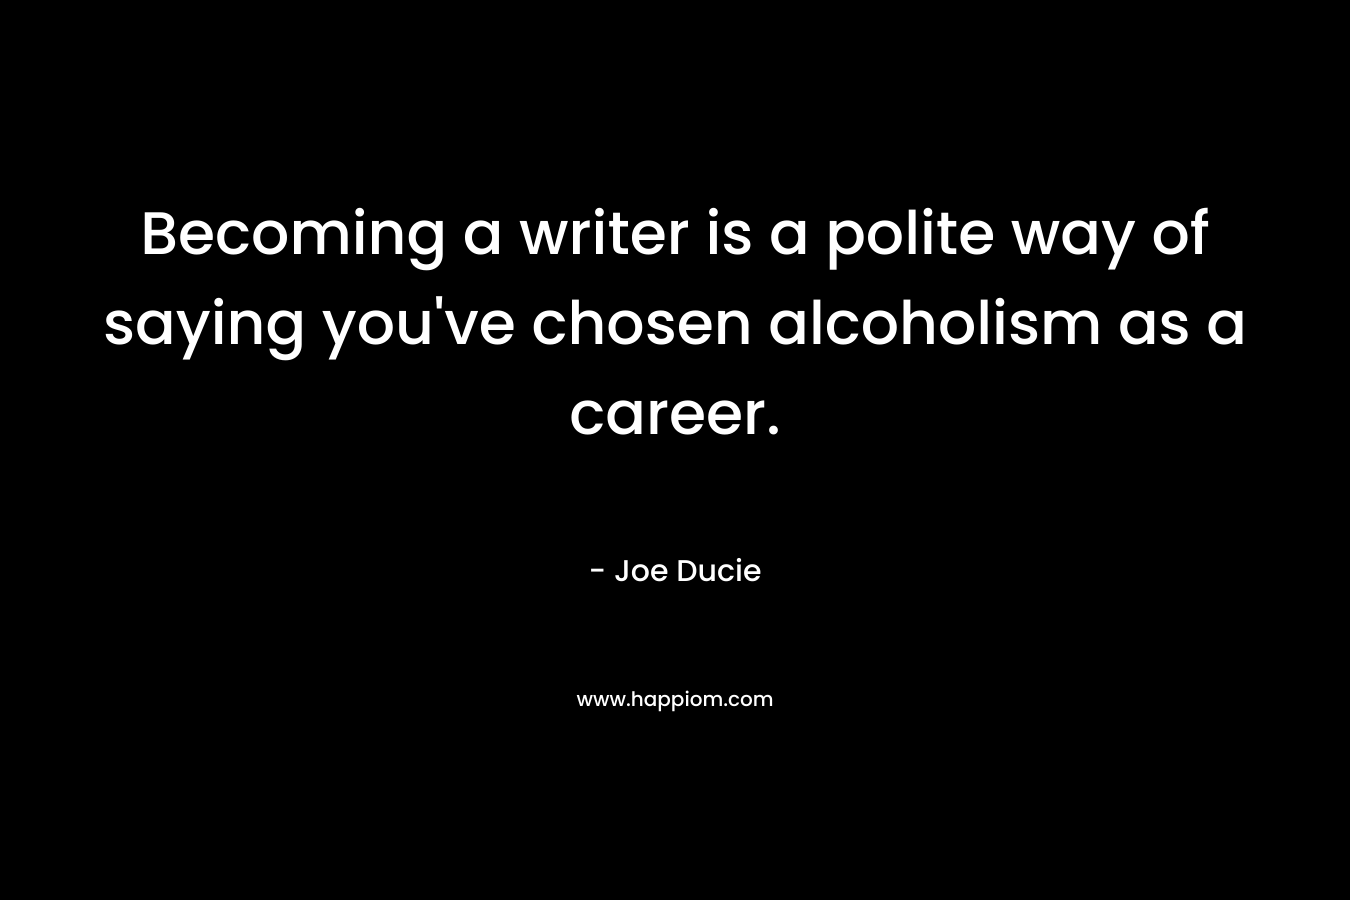 Becoming a writer is a polite way of saying you’ve chosen alcoholism as a career. – Joe Ducie